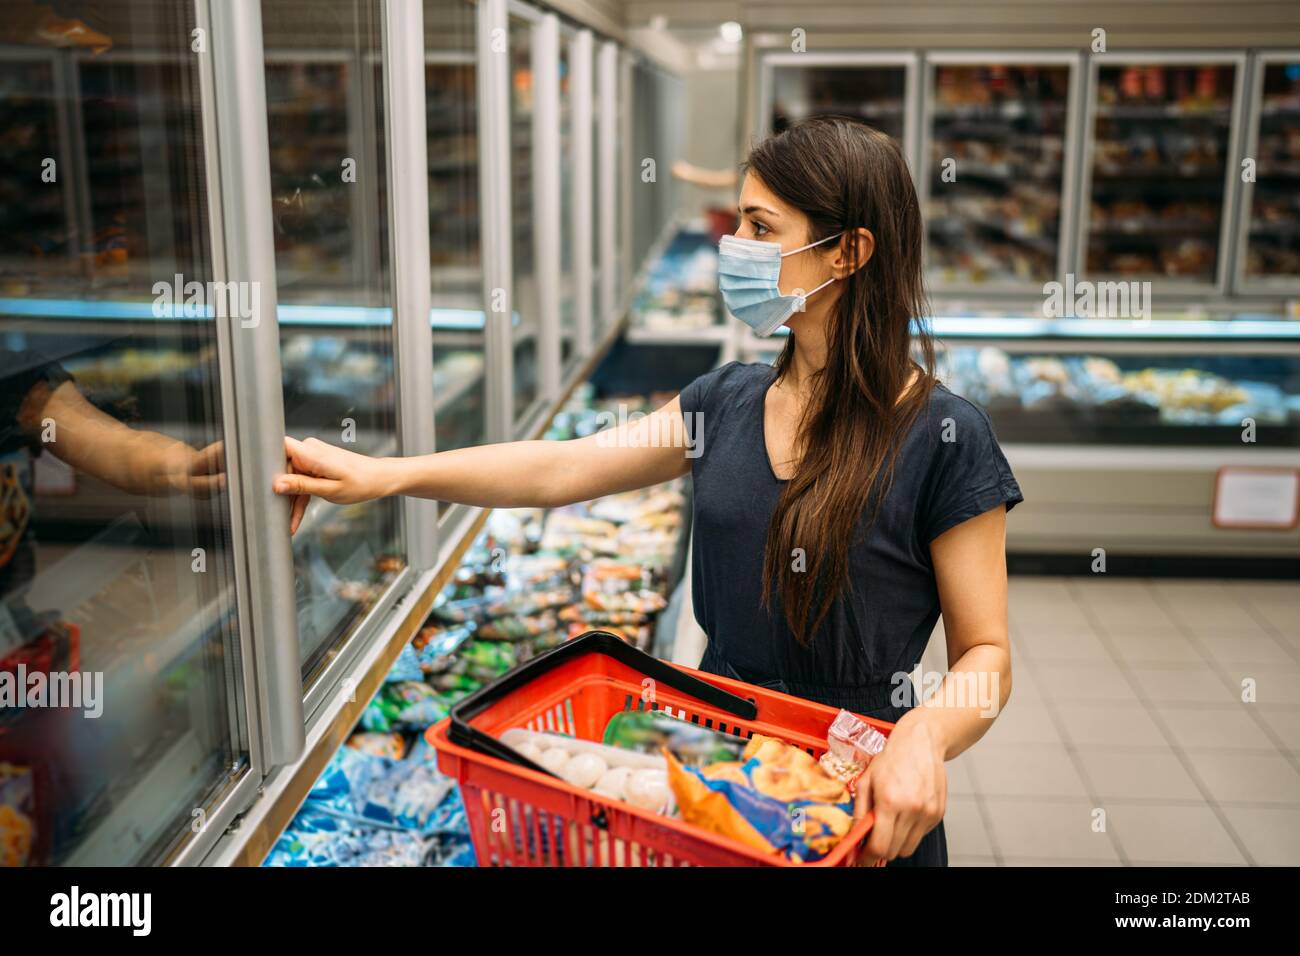 Young woman with protective face mask shopping for groceries in indoor groceries store.Coronavirus COVID-19 concept.Mandatory face mask in mall while Stock Photo